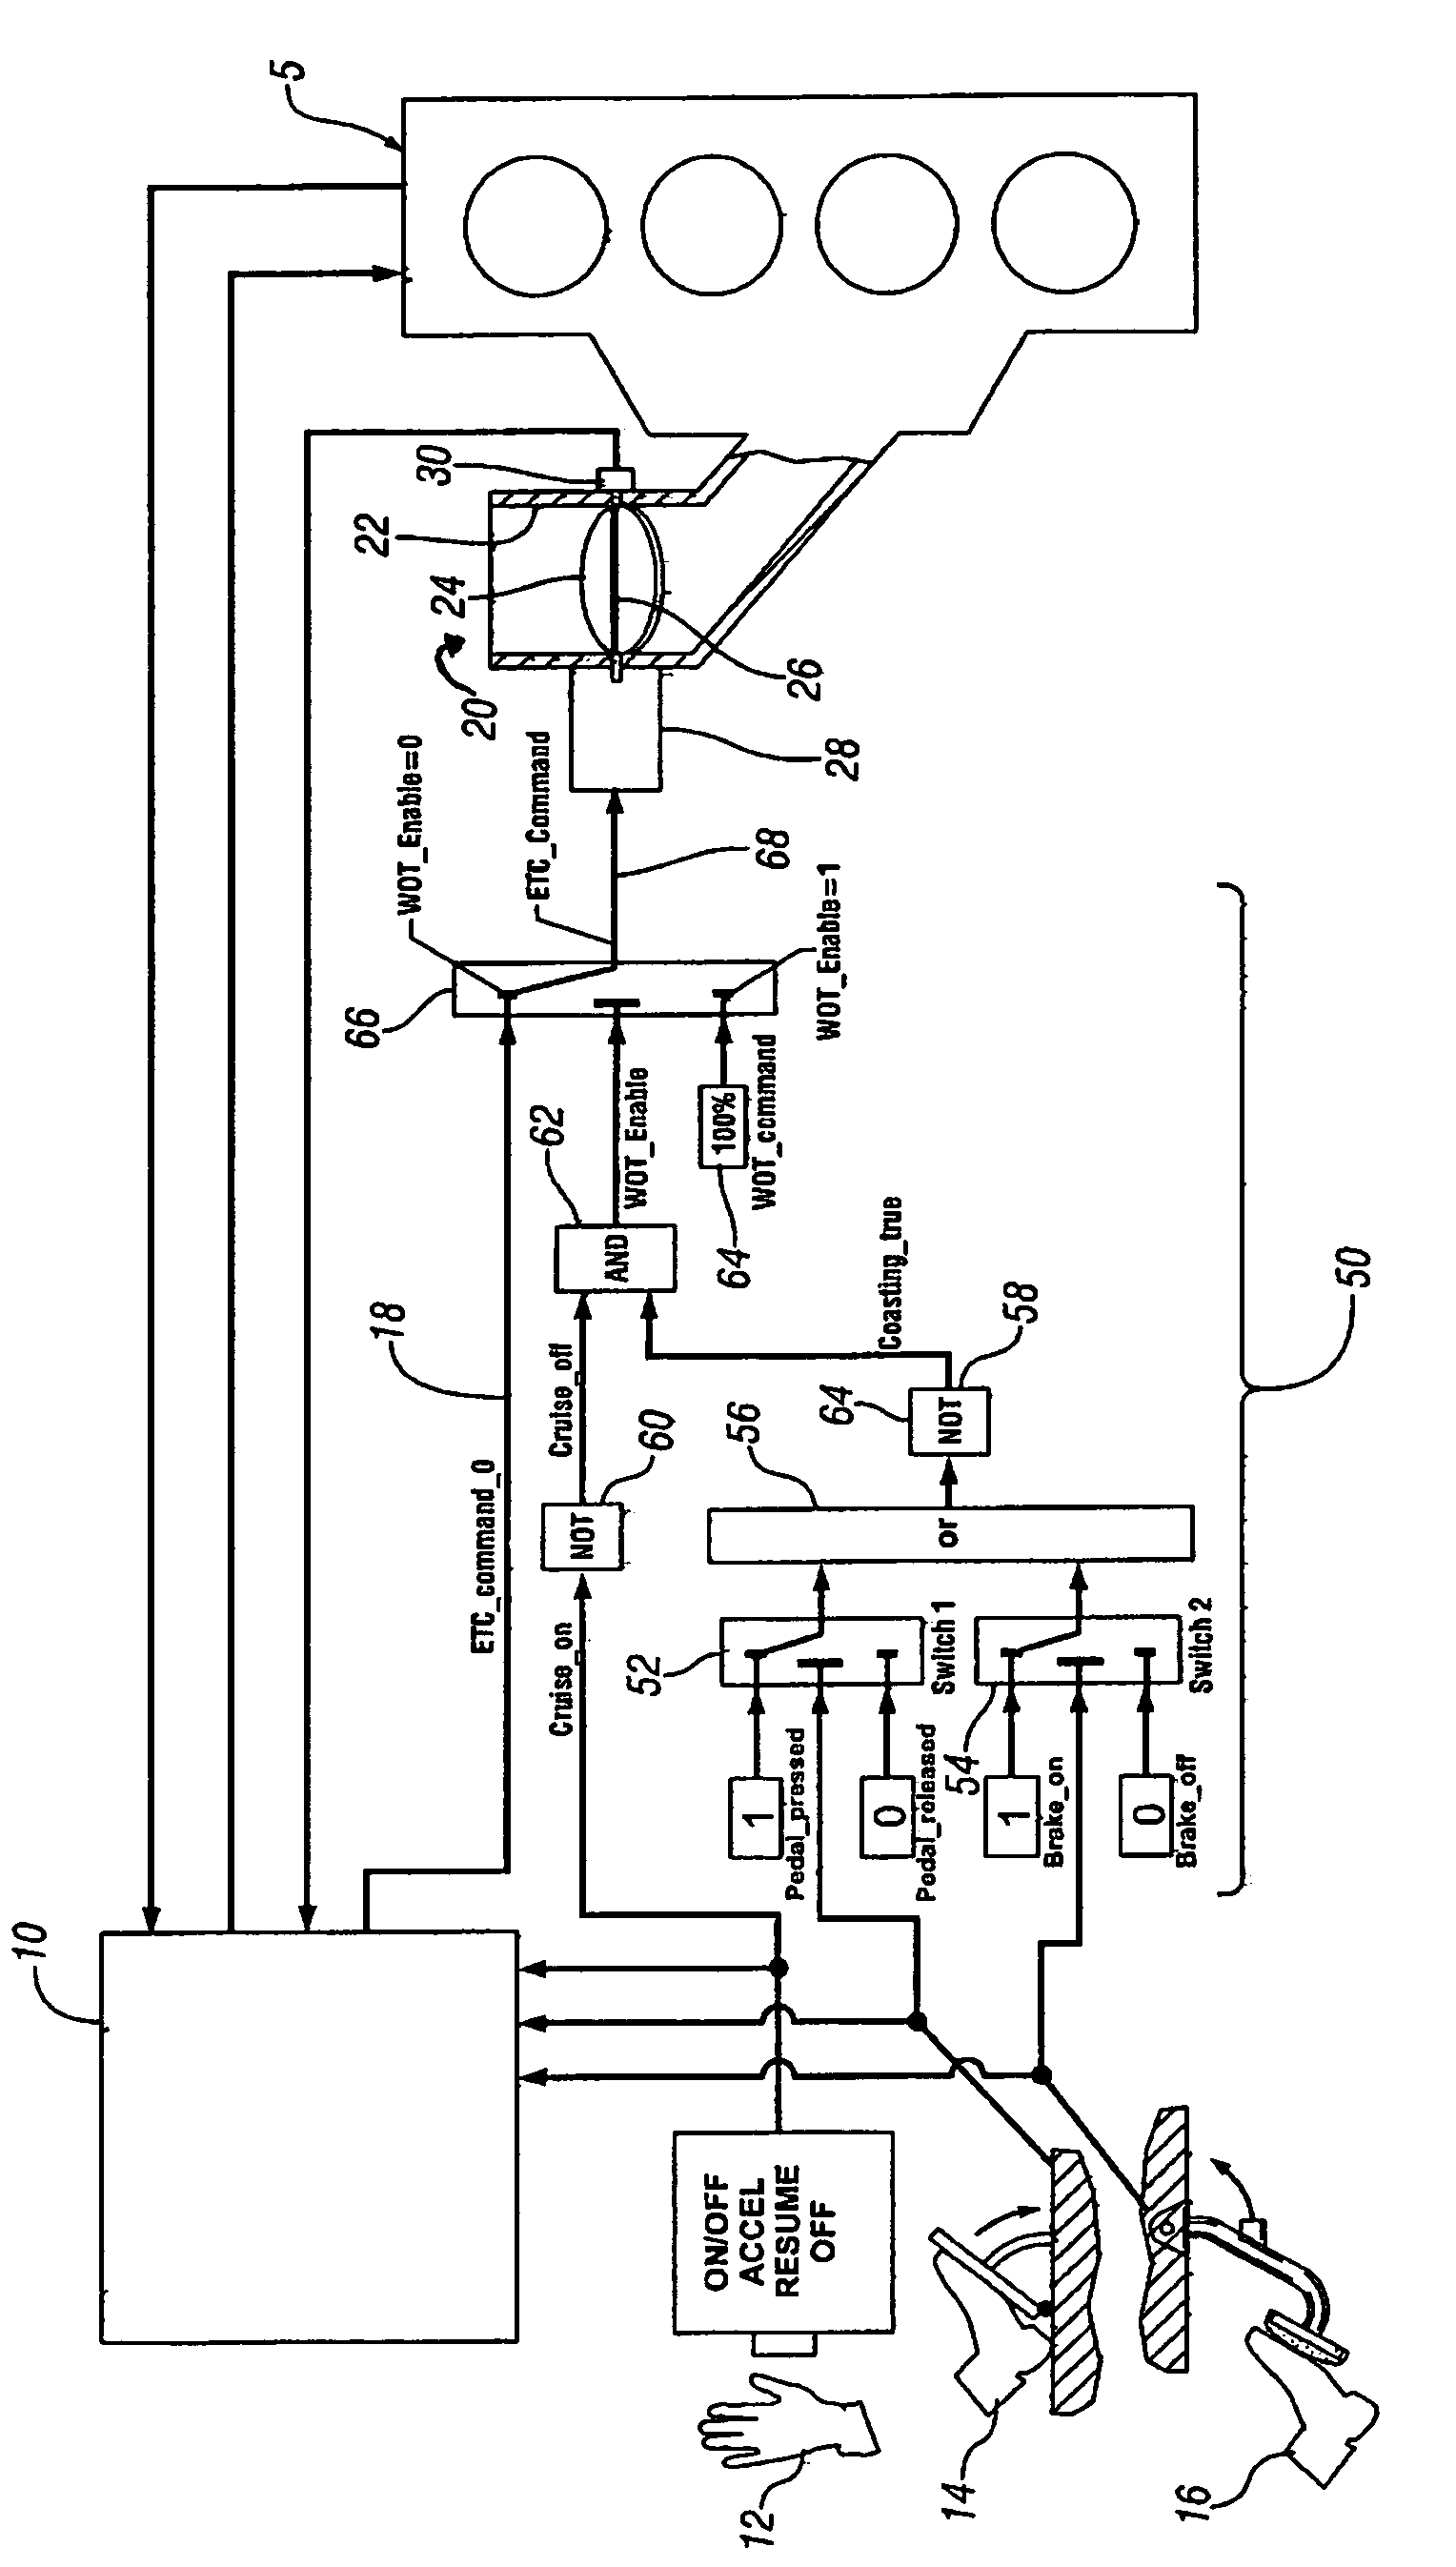 Method and apparatus for controlling throttle during vehicle coasting